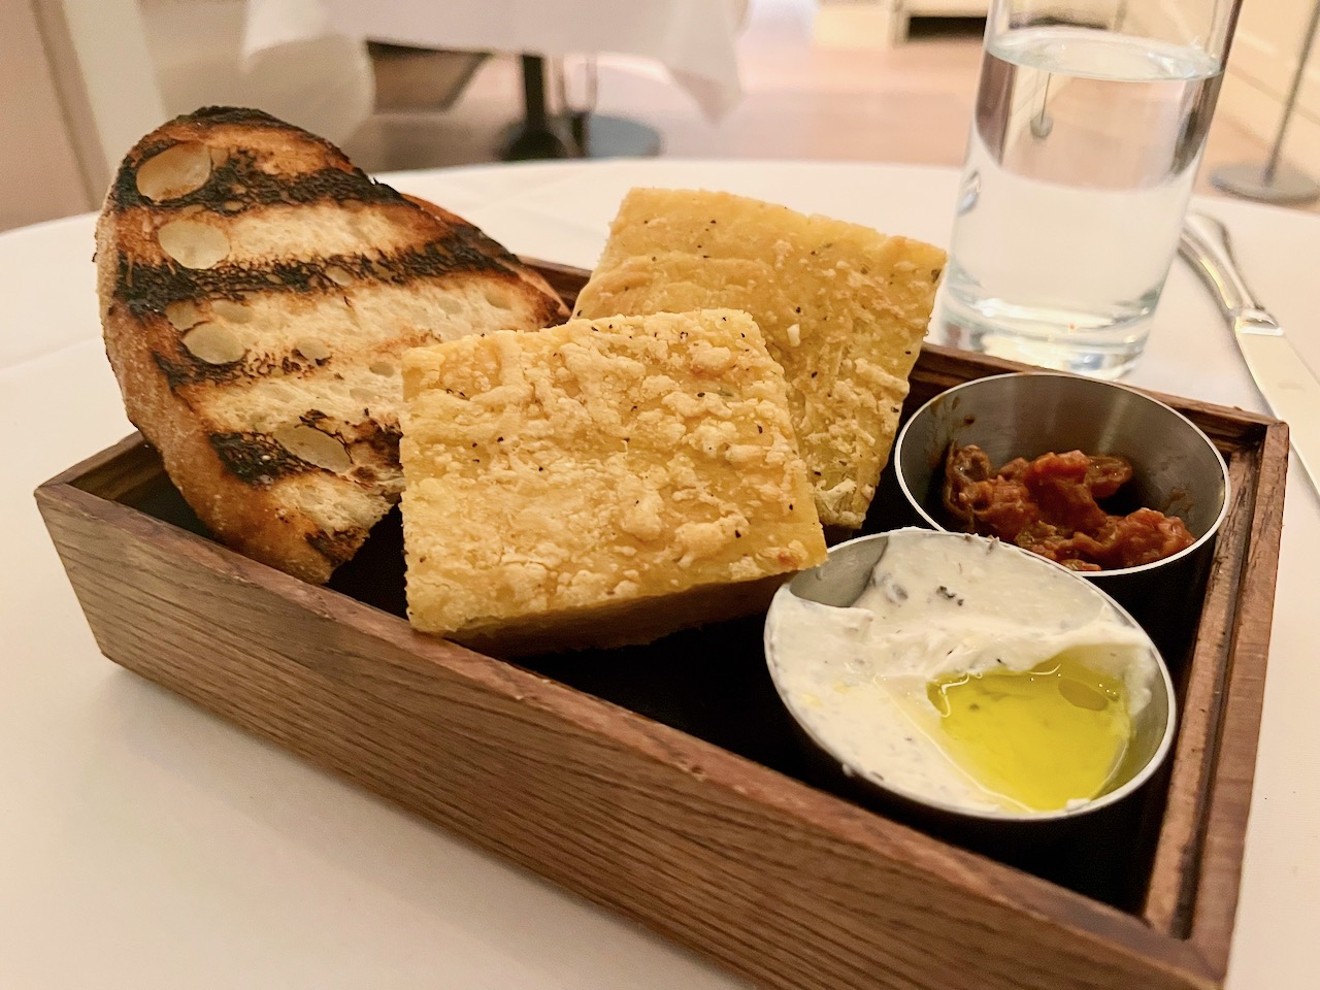 A basket of bread is complimentary; go ahead and eat up.